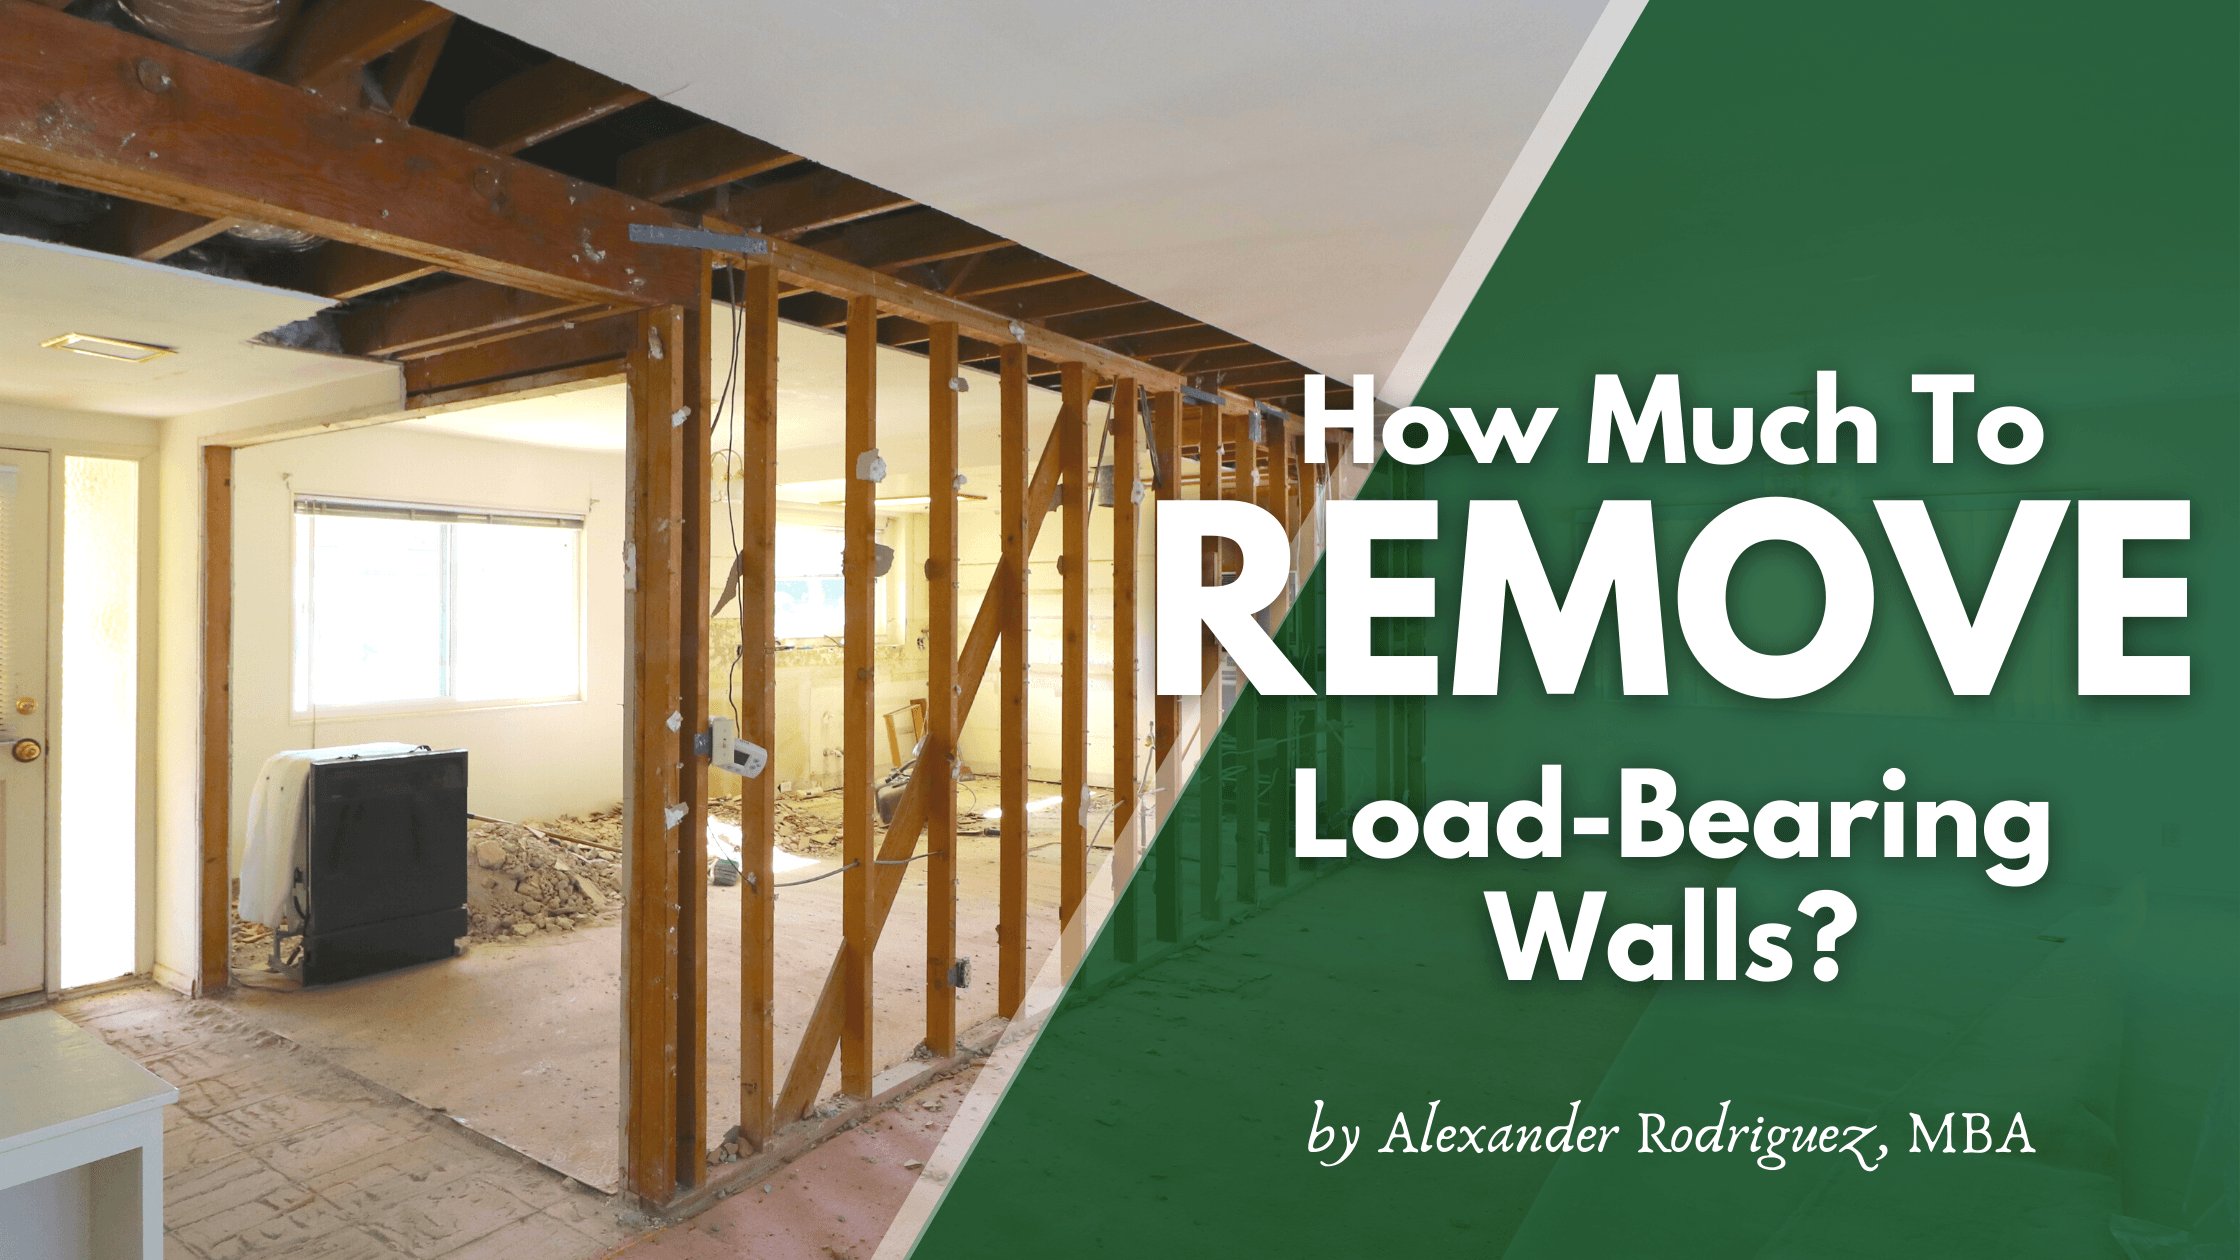 How to Determine if Exterior Walls are Load or Non-Load Bearing